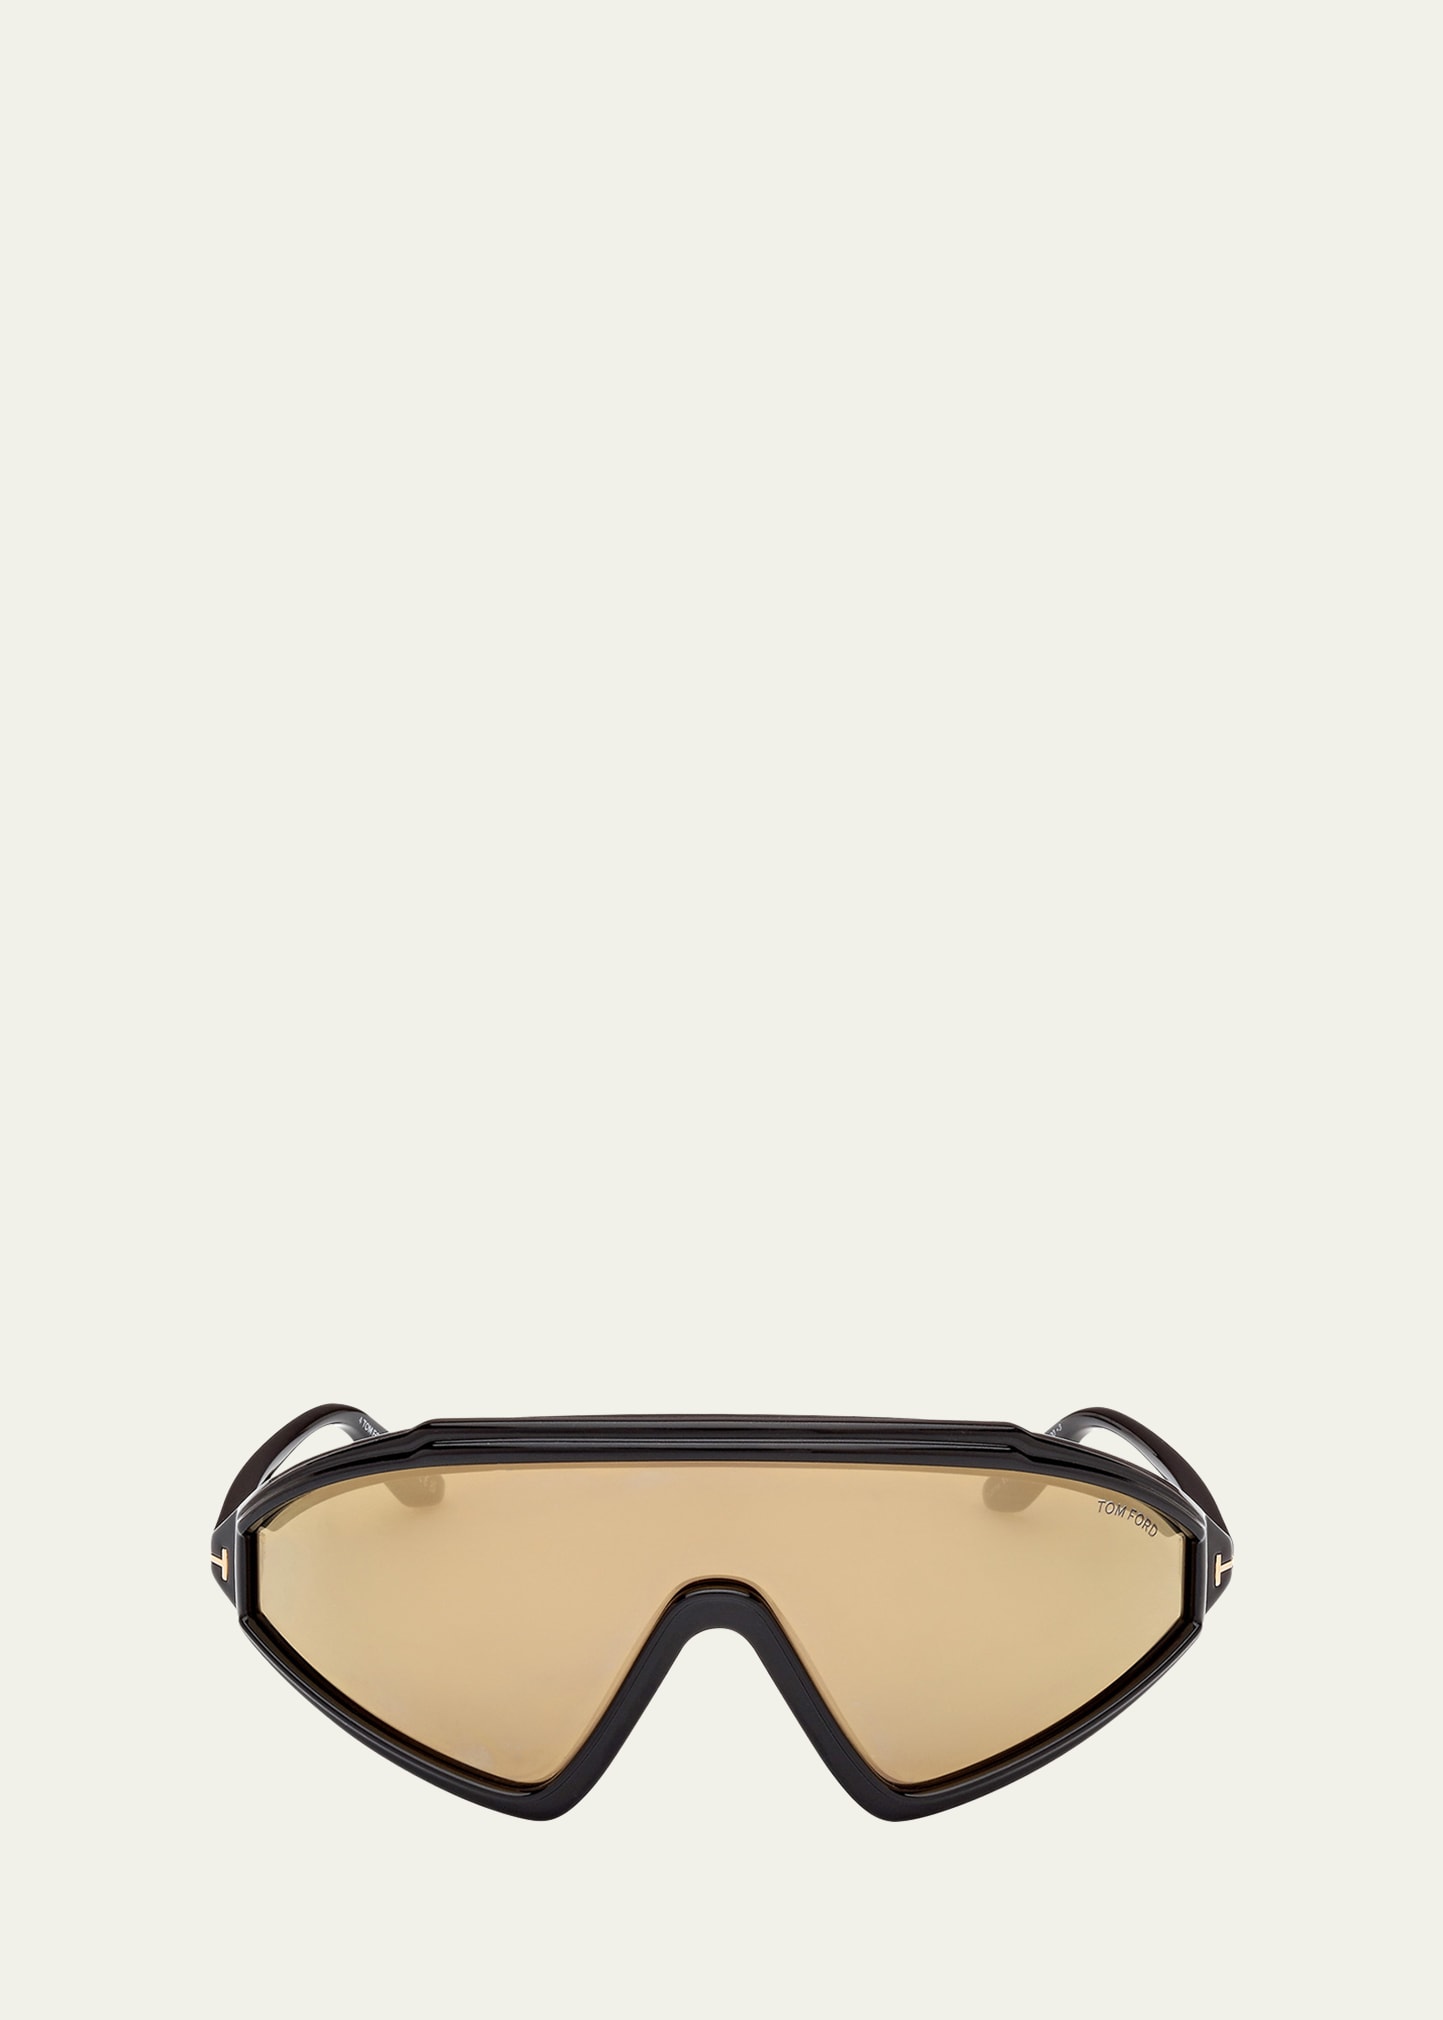 Tom Ford Shield Injected Sunglasses In Shiny Black / Bro